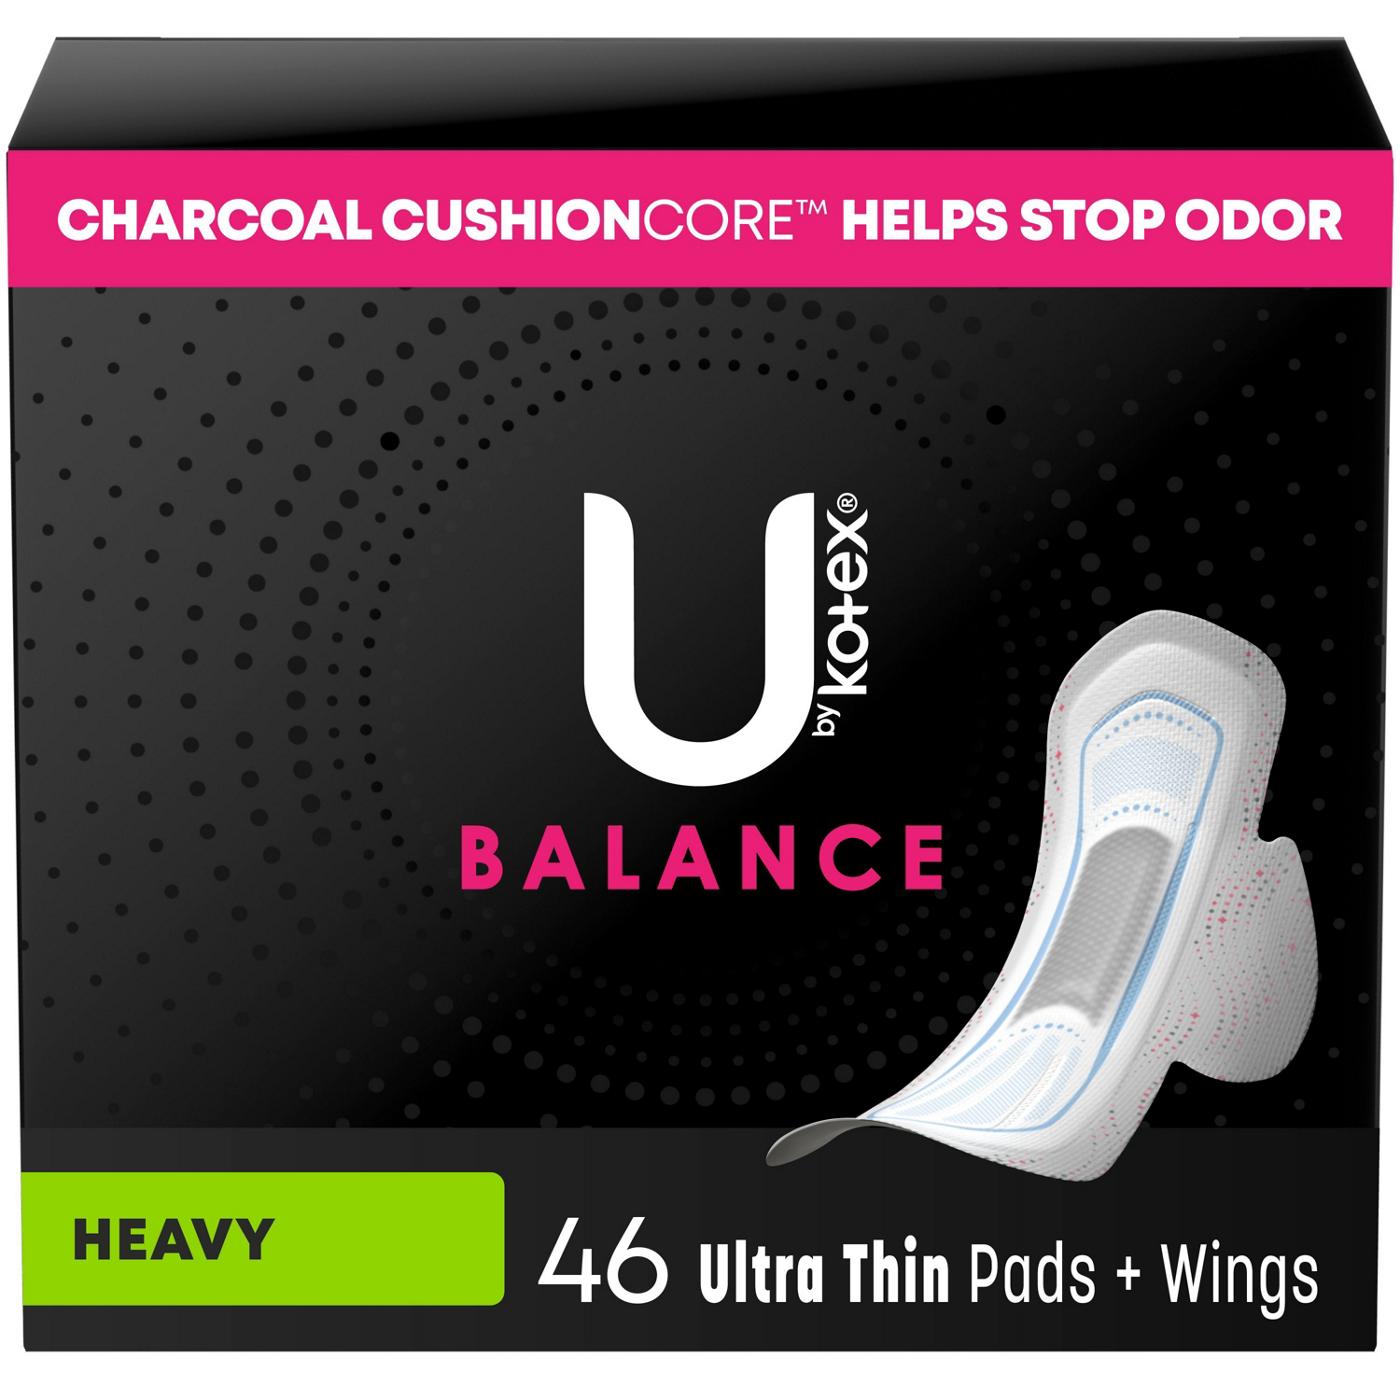 U by Kotex Balance Ultra Thin Pads with Wings - Heavy Absorbency; image 1 of 6